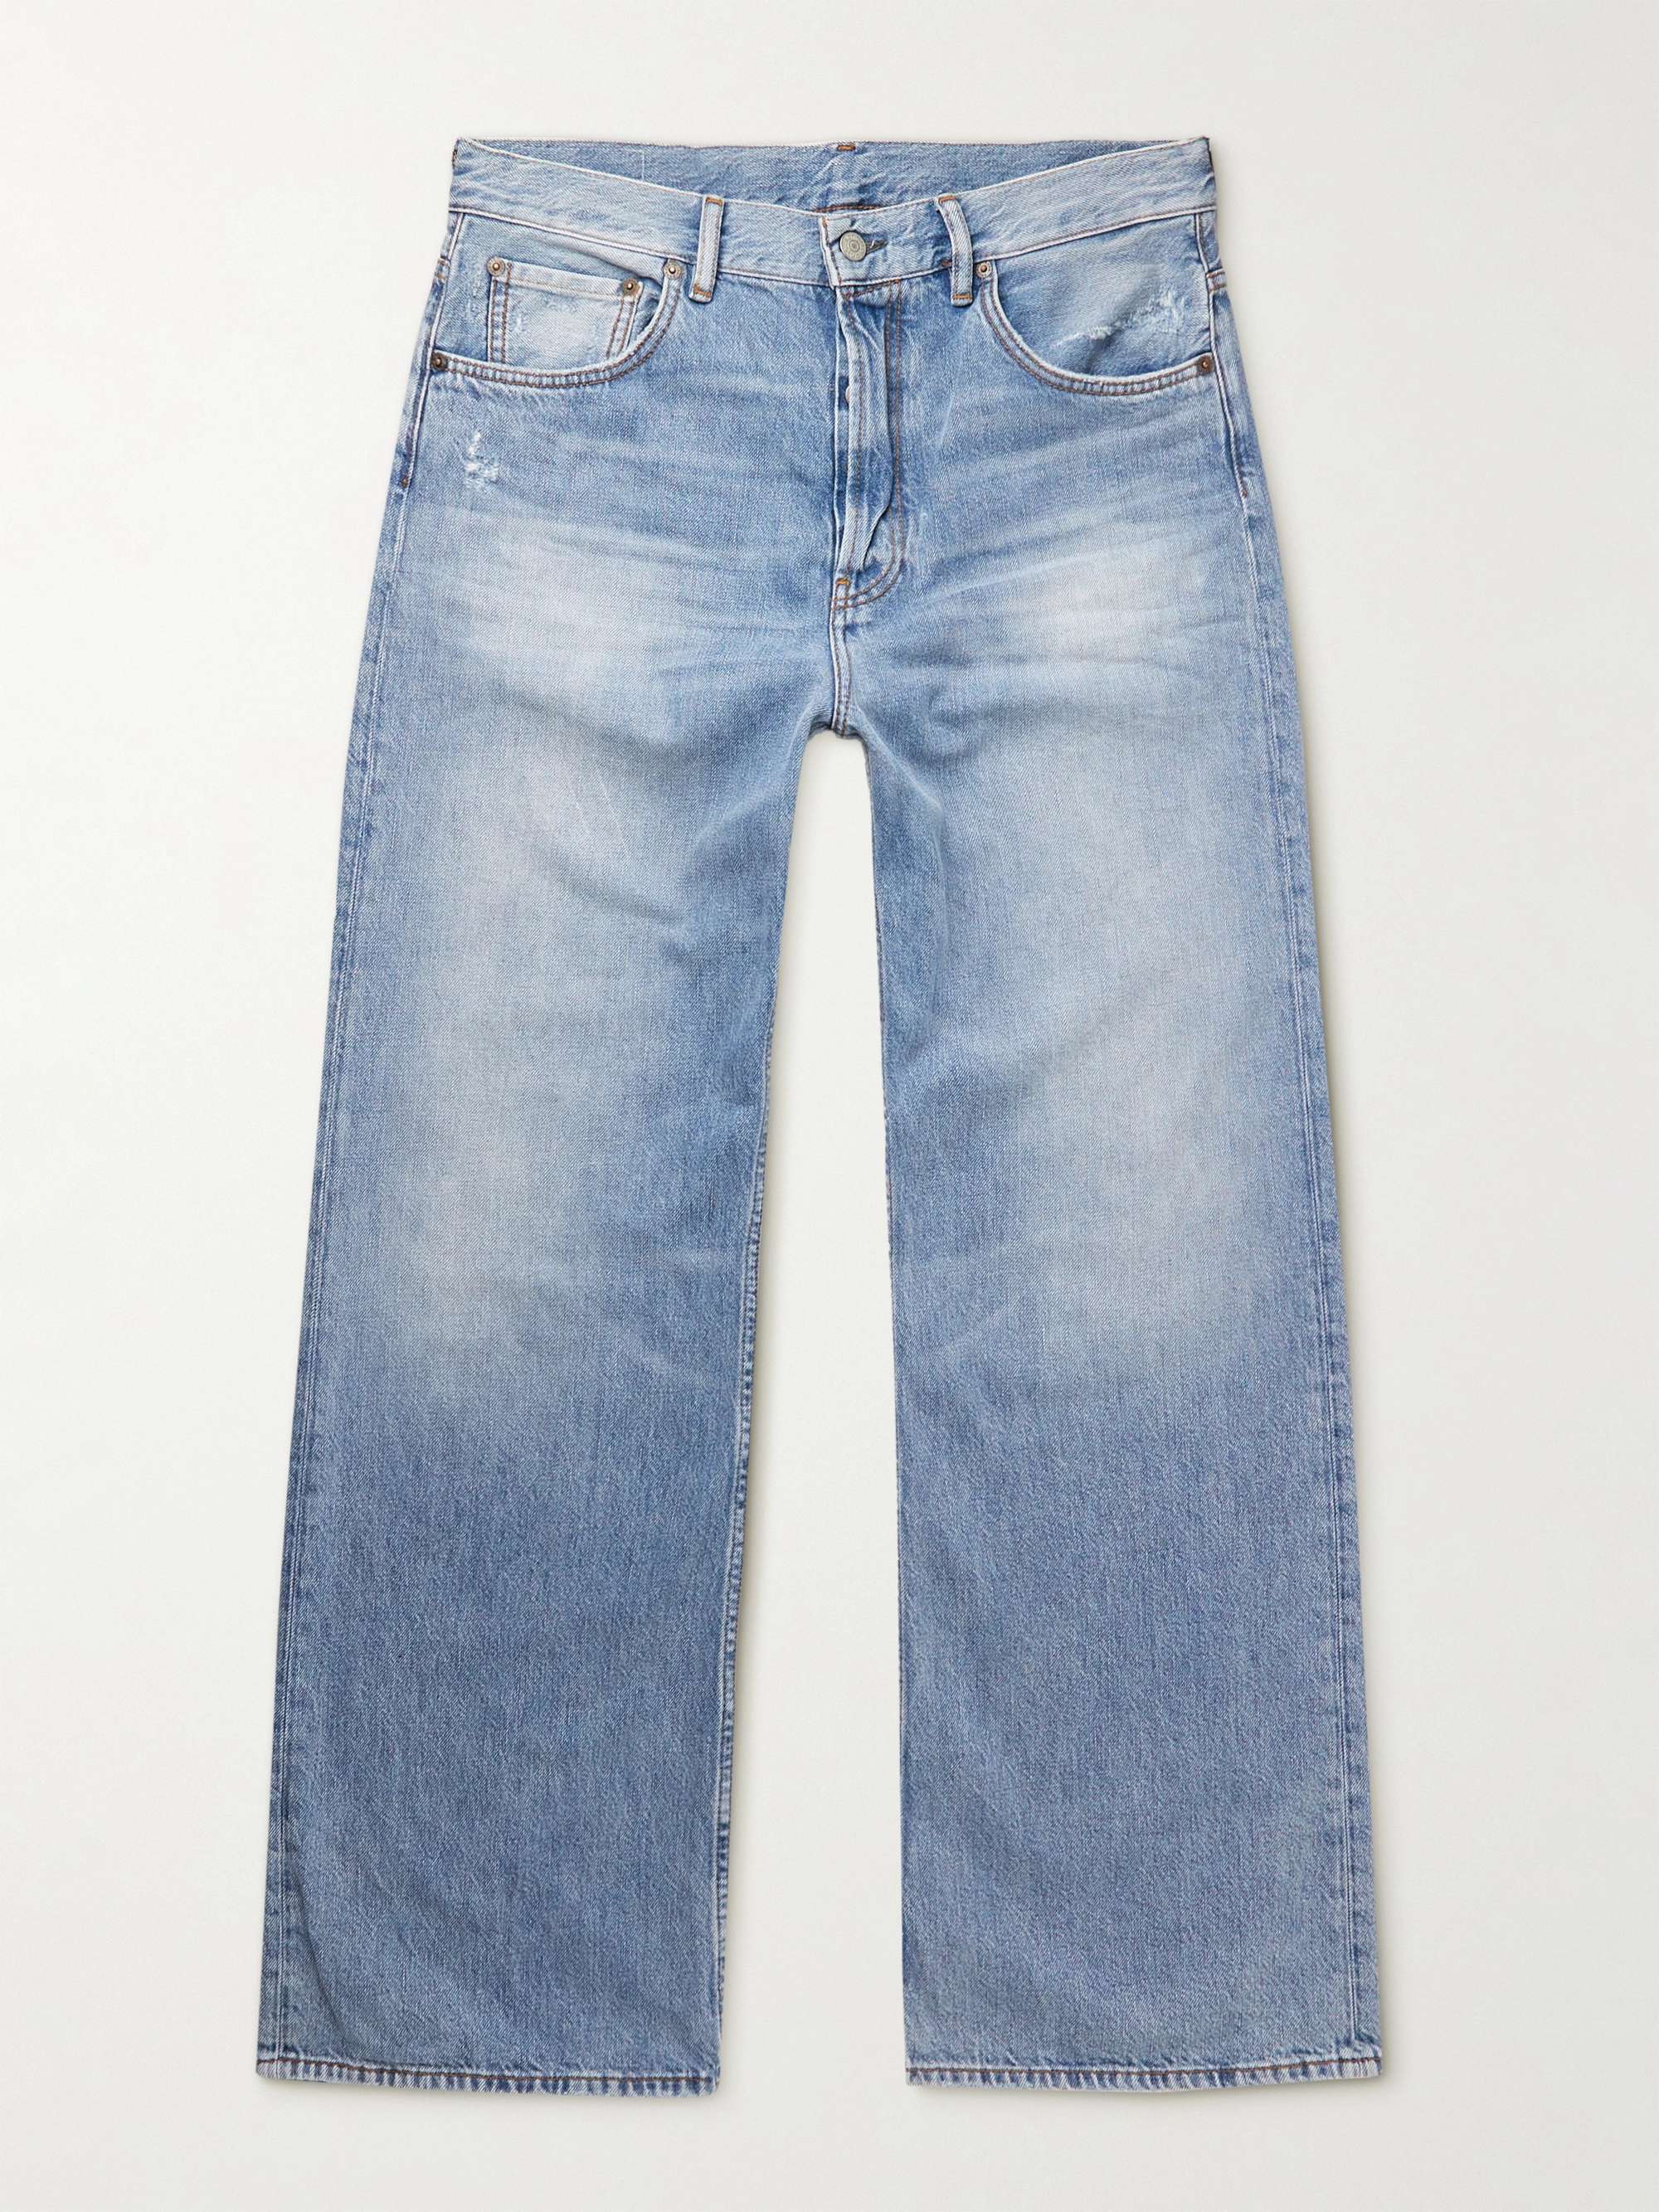 ACNE STUDIOS Flared Distressed Jeans